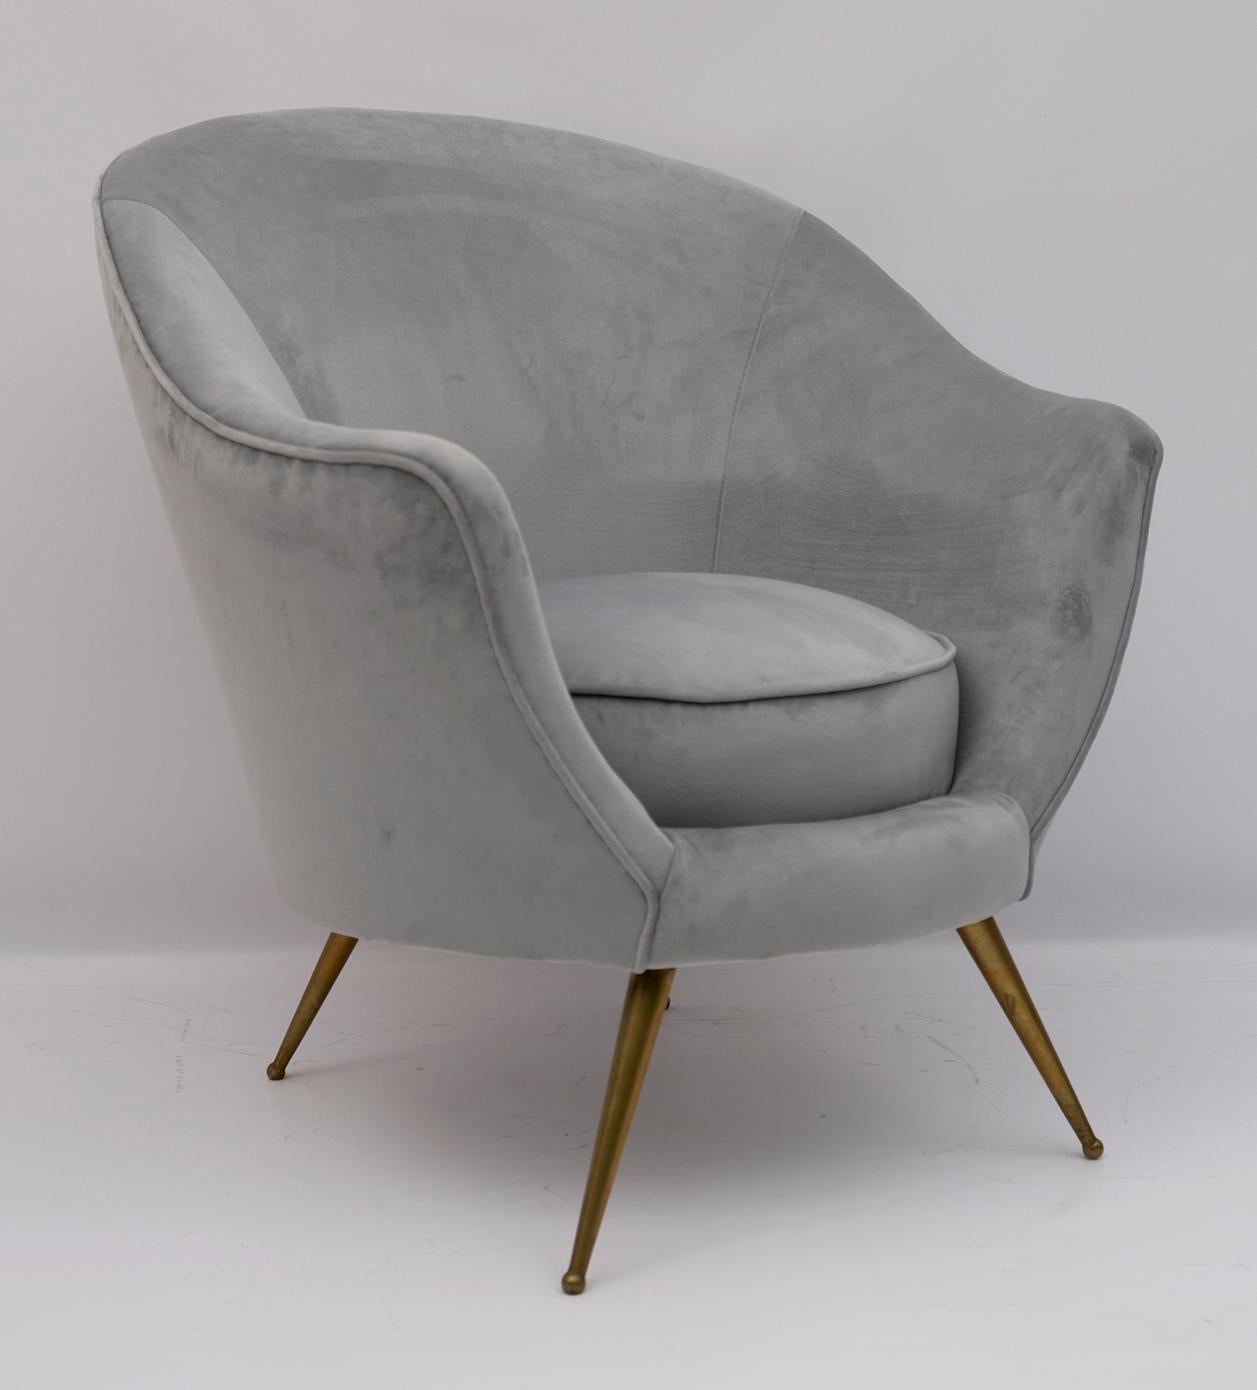 Beautiful armchair designed by Federico Munari in the early 1950s. The upholstery has been redone in velvet.